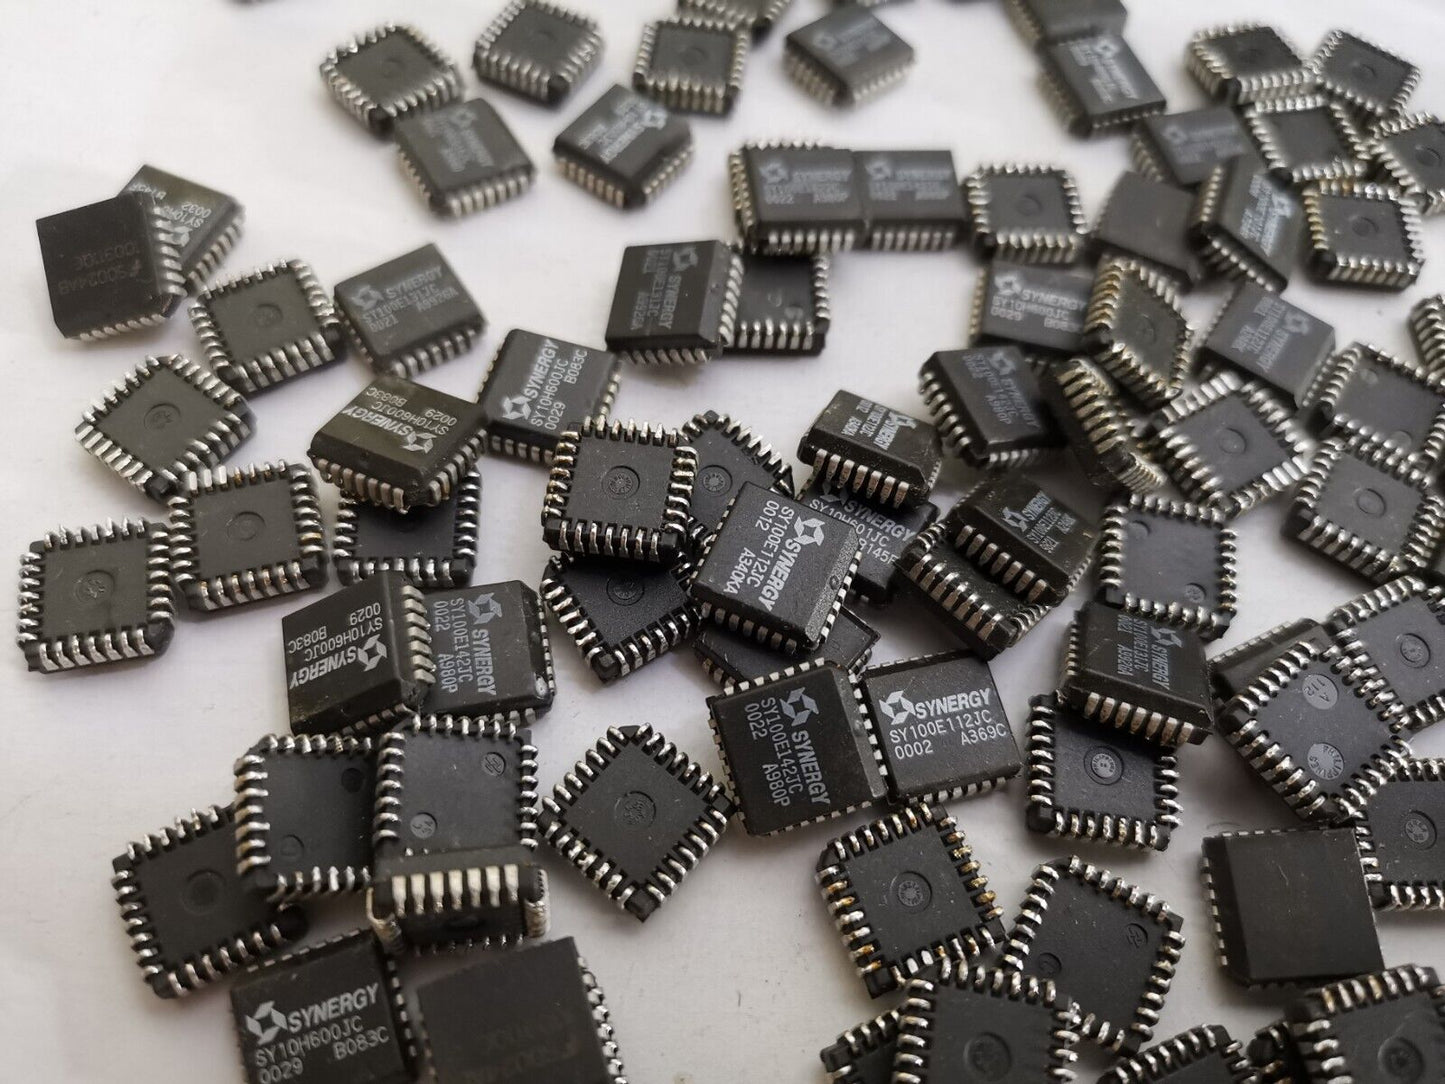 Joblot Of ECL Logic Ultra Fast Logic ICs From Anritsu Test Gear SMD Parts